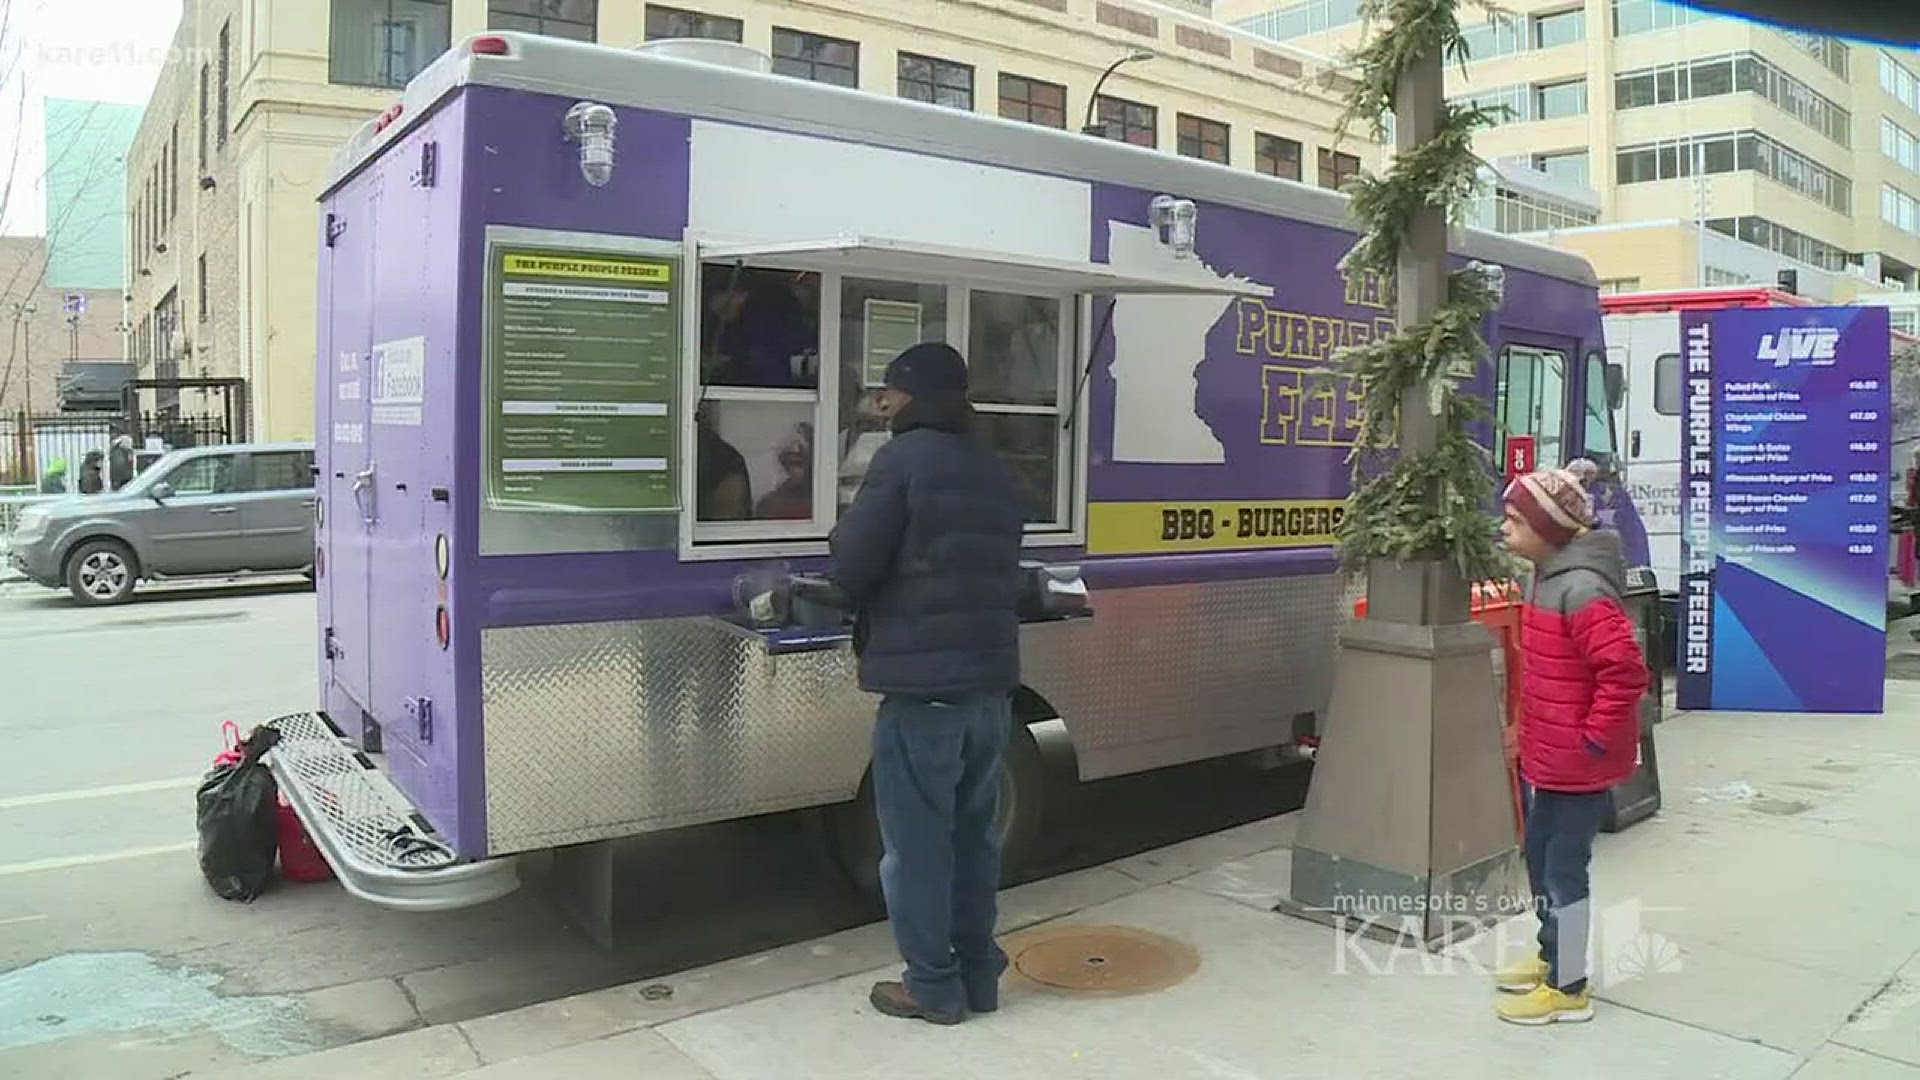 An army of popular local food trucks are catering to Super Bowl visitors and locals during the 10-day festival organizers are calling Super Bowl LIVE. Gordon Severson set out to find the most "Minnesota" food. http://kare11.tv/2DtVnKw